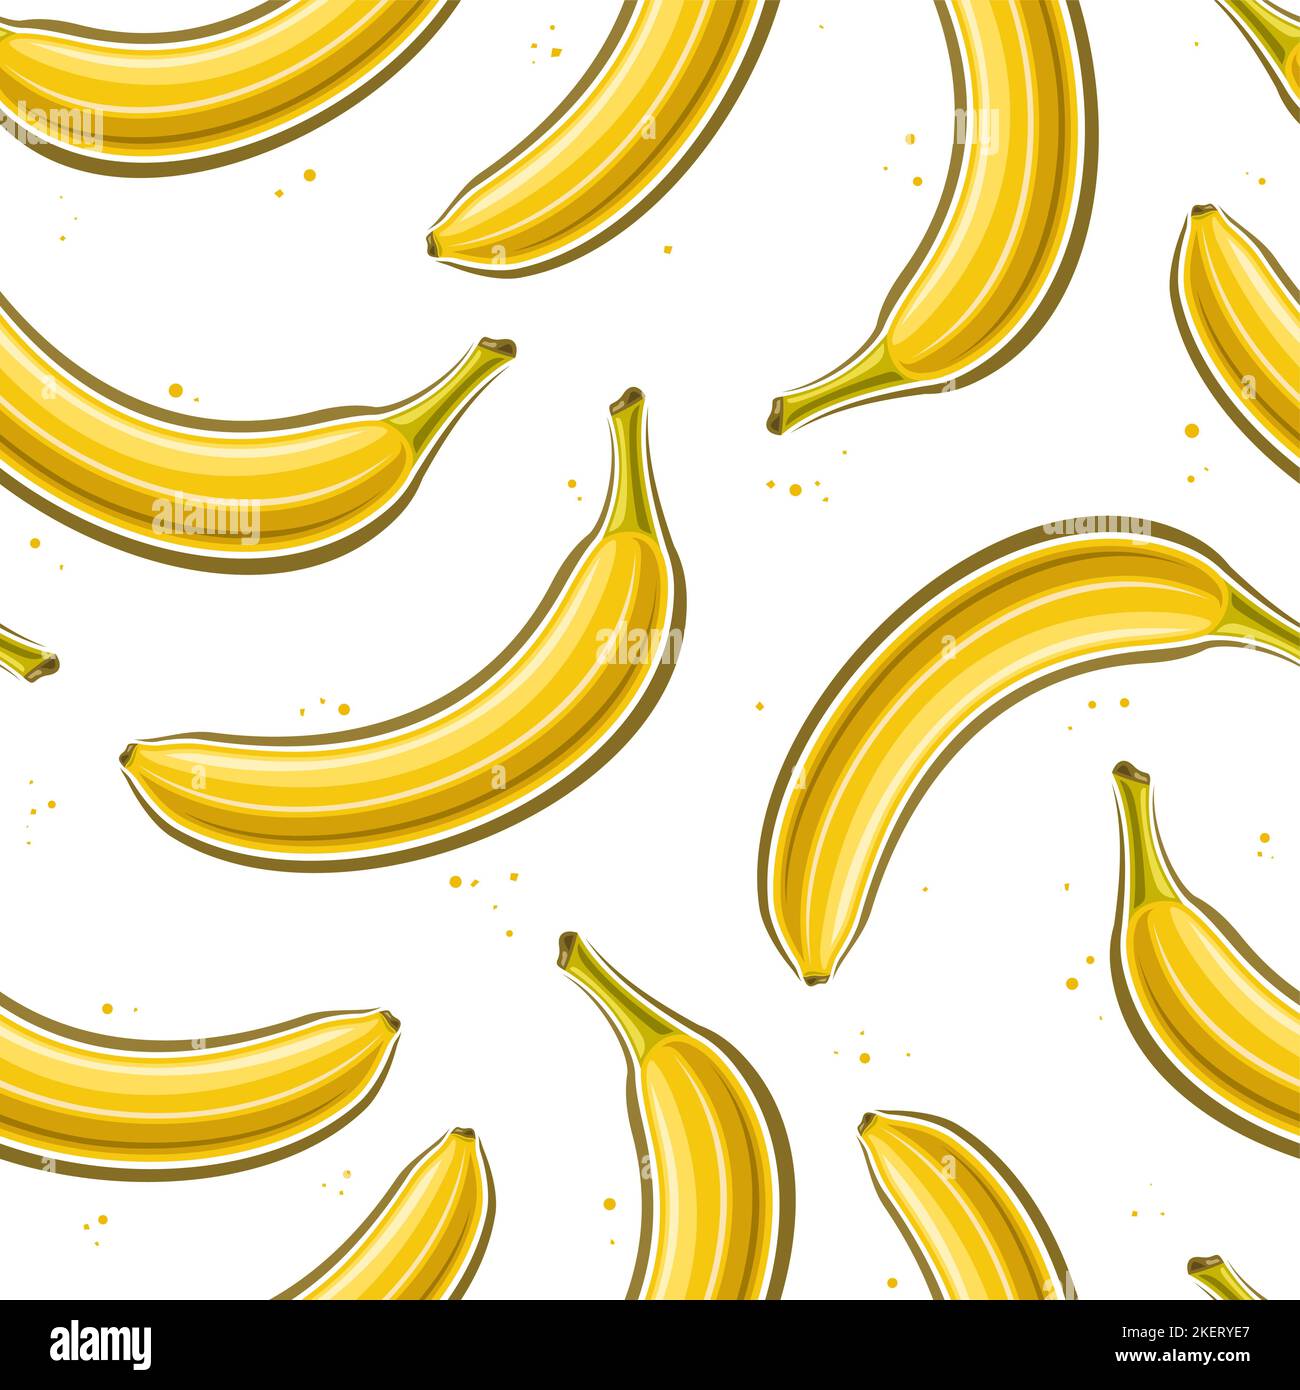 Vector Banana Seamless Pattern, square repeating background with cut out illustrations of whole yellow ripe bananas, group of flat lay single closed b Stock Vector